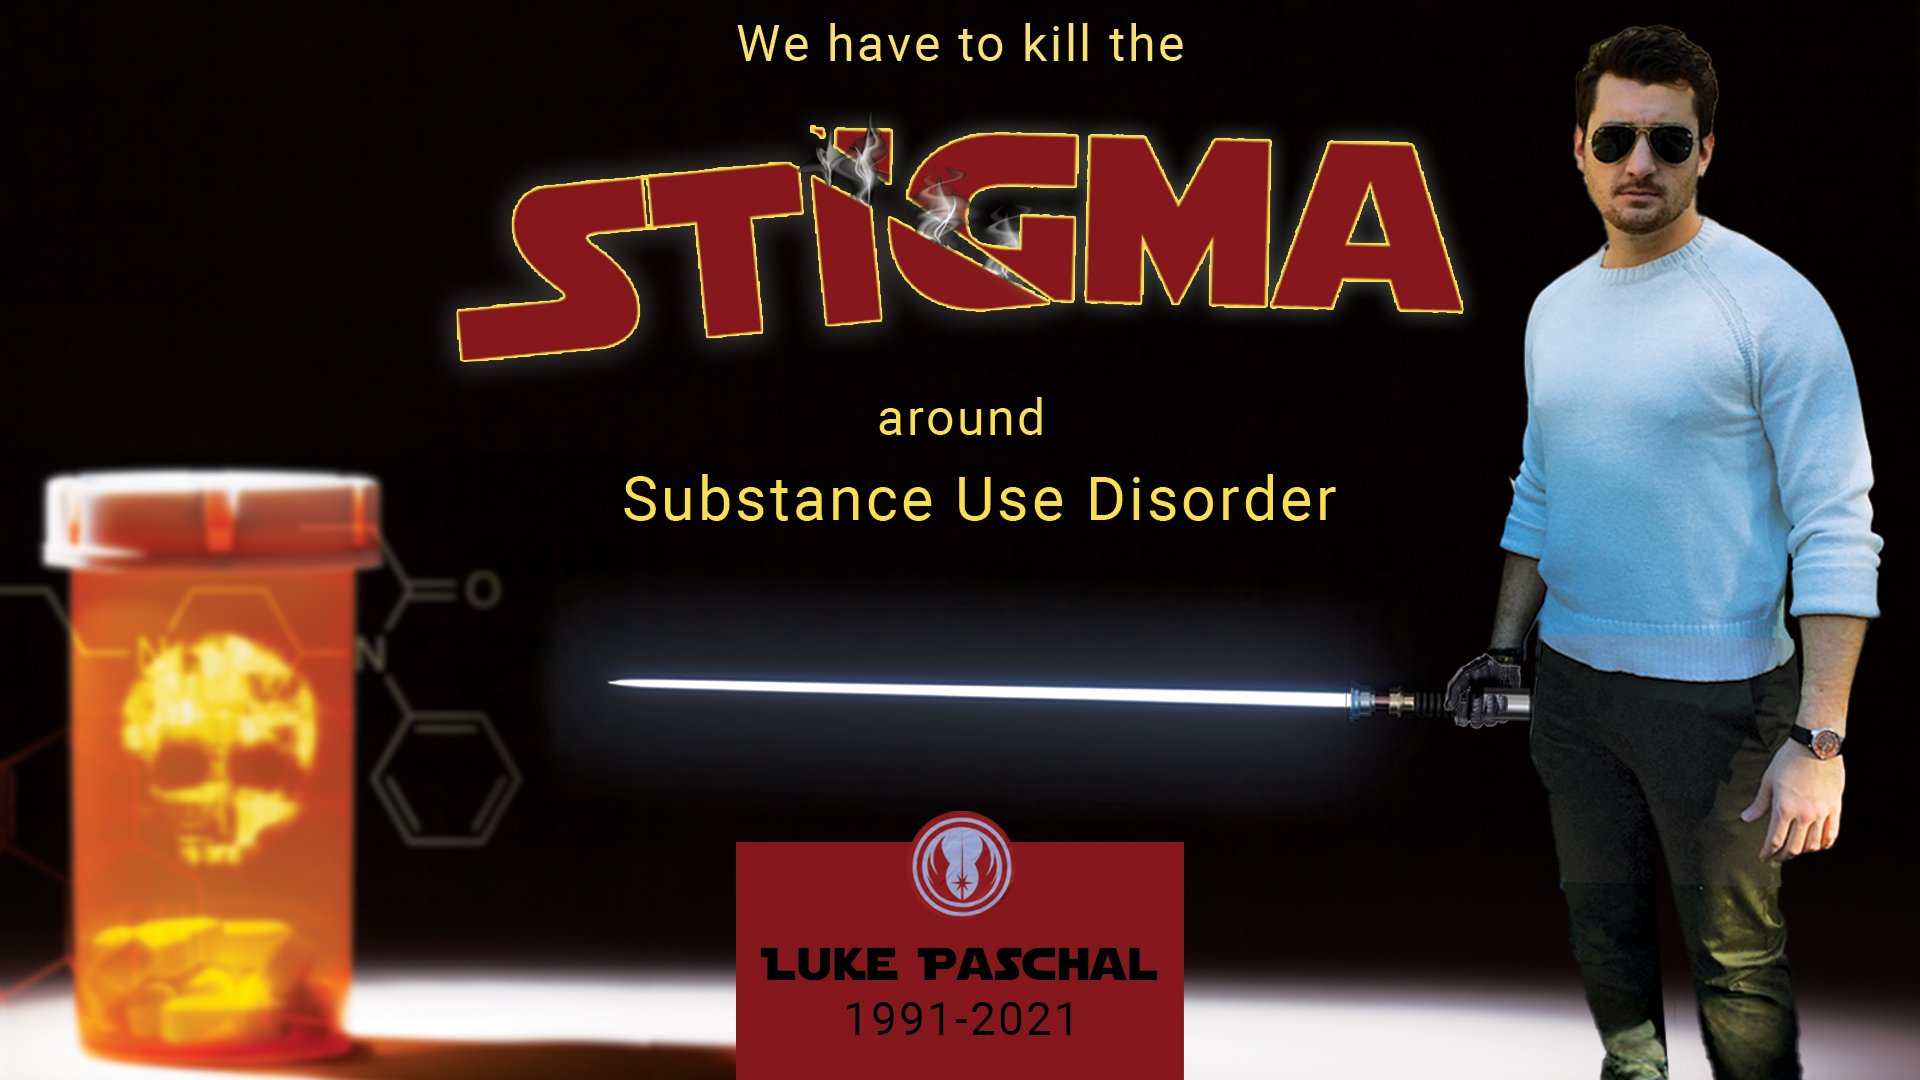 Happy Star Wars Day! We could not resist bringing some Light Saber fun to the biggest part of Luke's legacy!  Together we can all play a part in Killing this stigma that is centered around Substance Use Disorder!  Thank you to all the rebel forces th